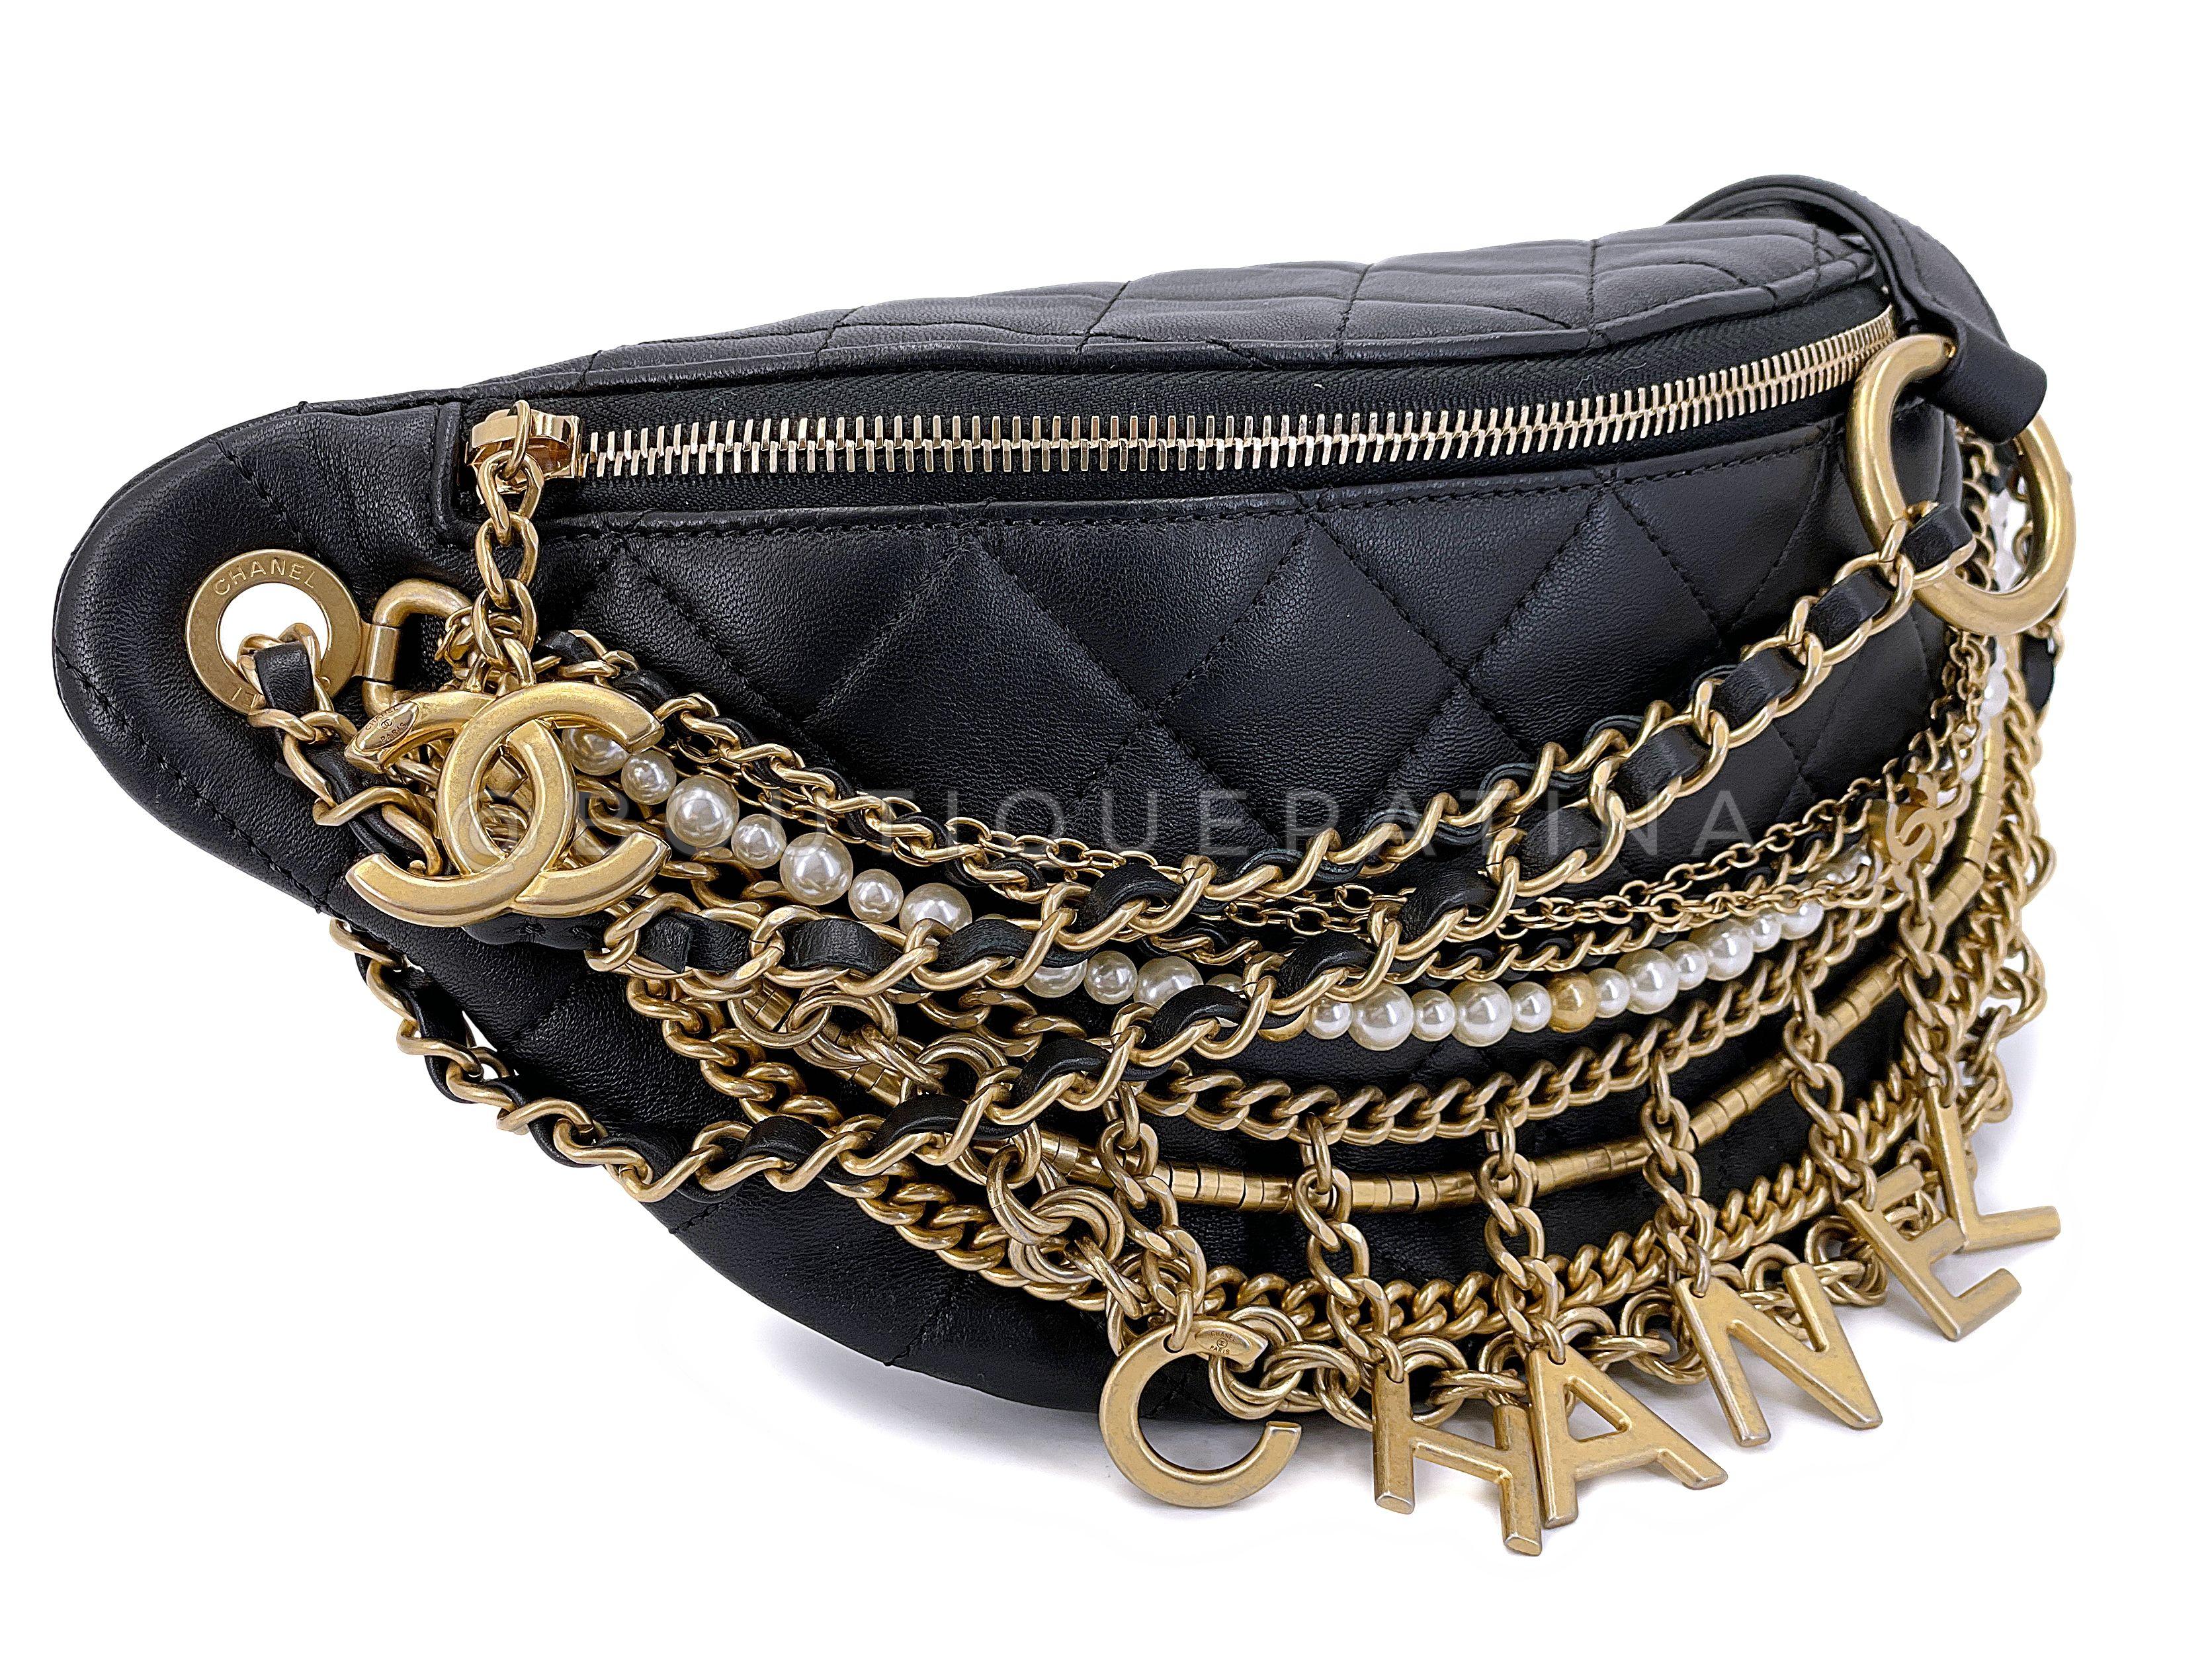 Store item: 67686
Effortlessly chic and Chanel are their waist bag/fanny packs.

Released limited edition for the 2019 Chanel Métiers d'Art Paris-New York, a collection inspired by the Egyptian civilization, this is a special deviation of the